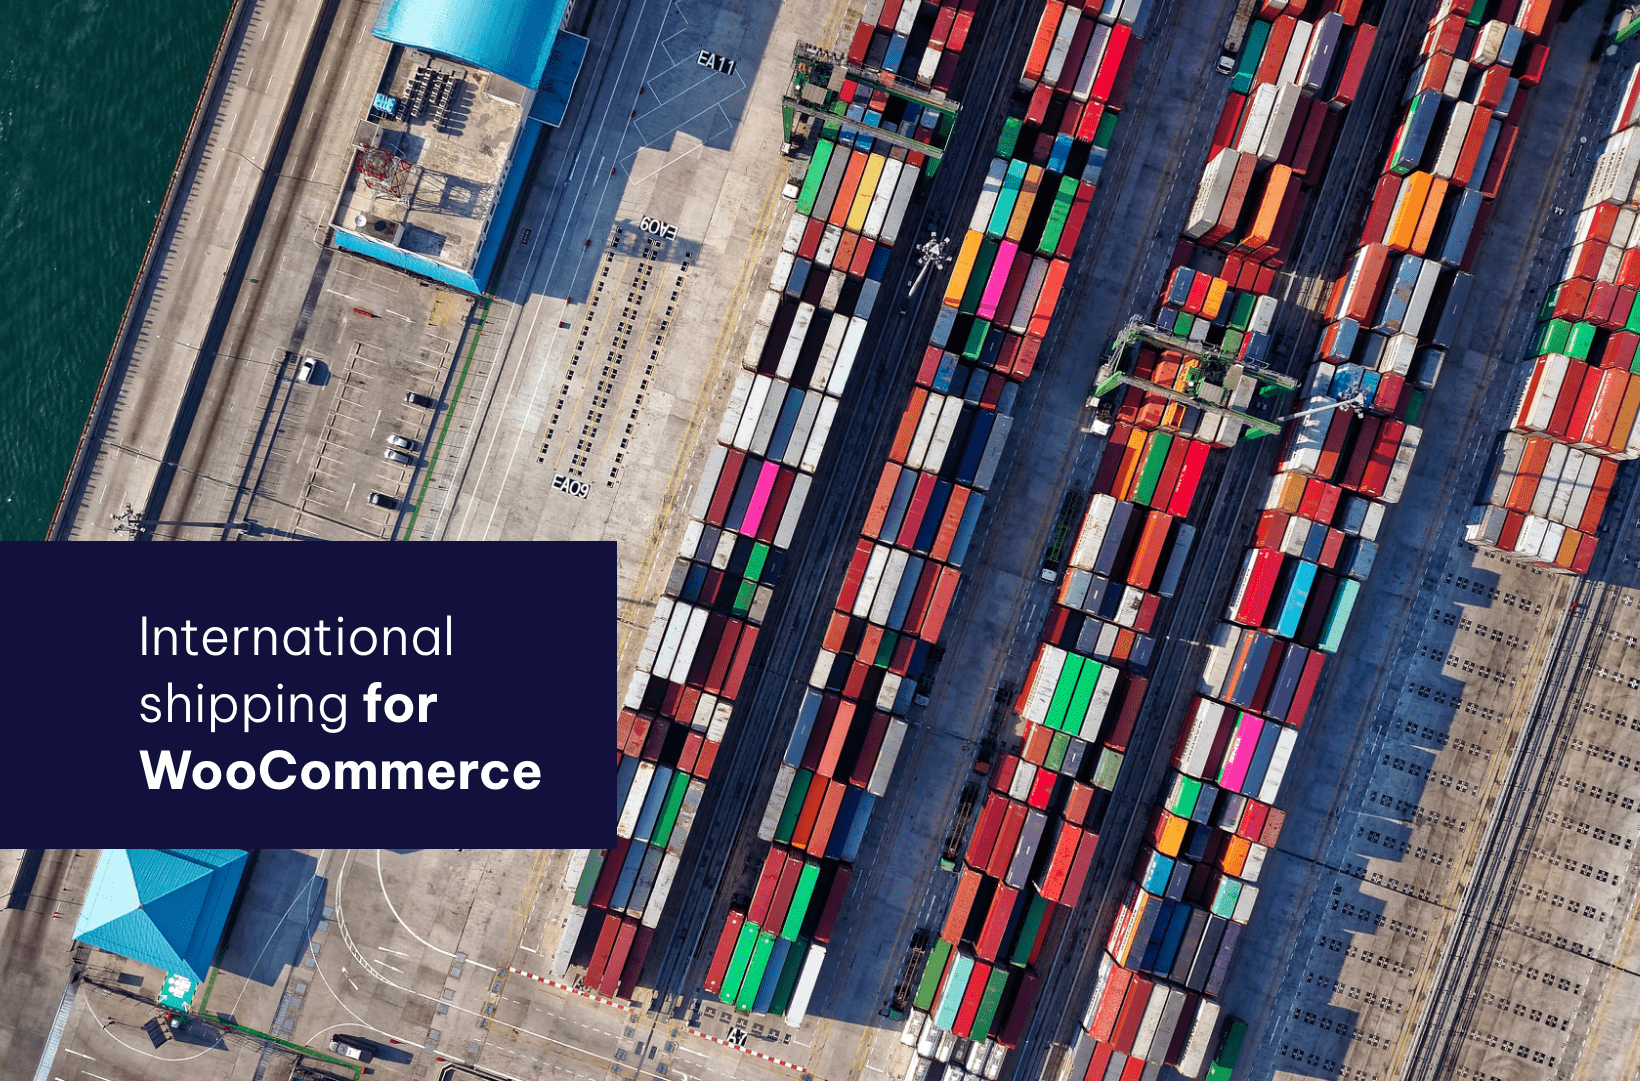 International shipping for WooCommerce